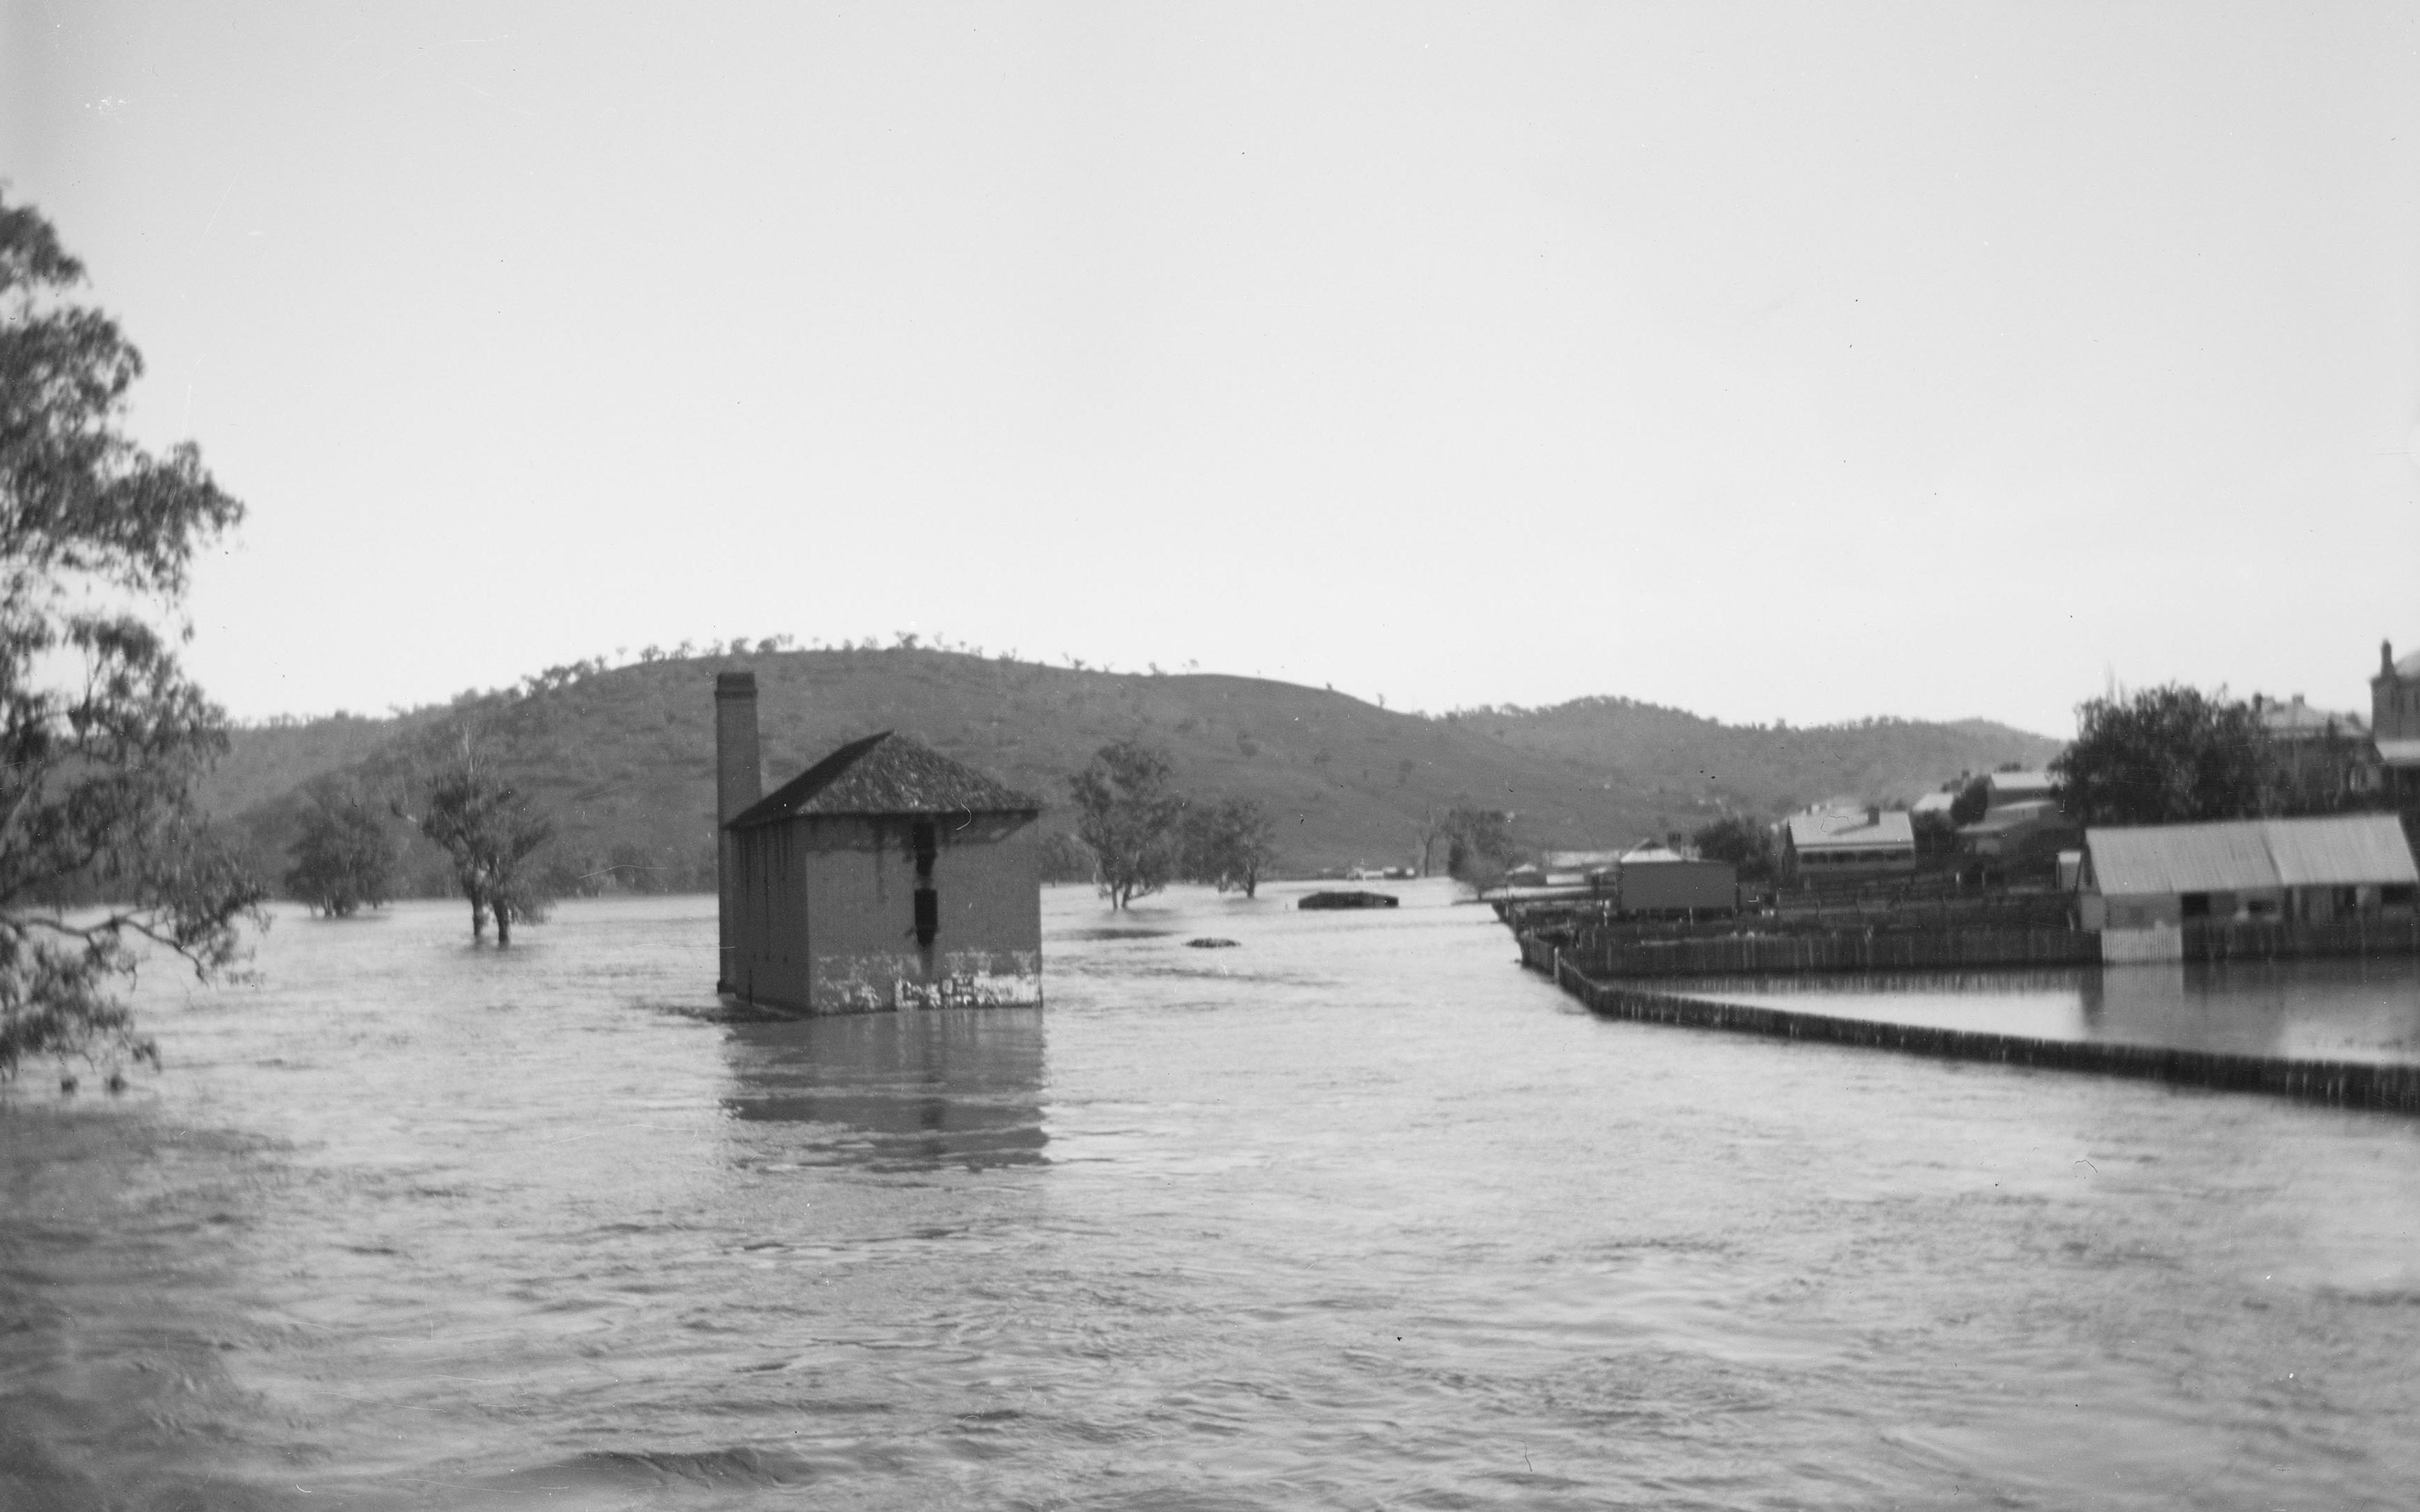 The flour mill surrounded by water during the 1900 flood in Gundagai, New South Wales. 